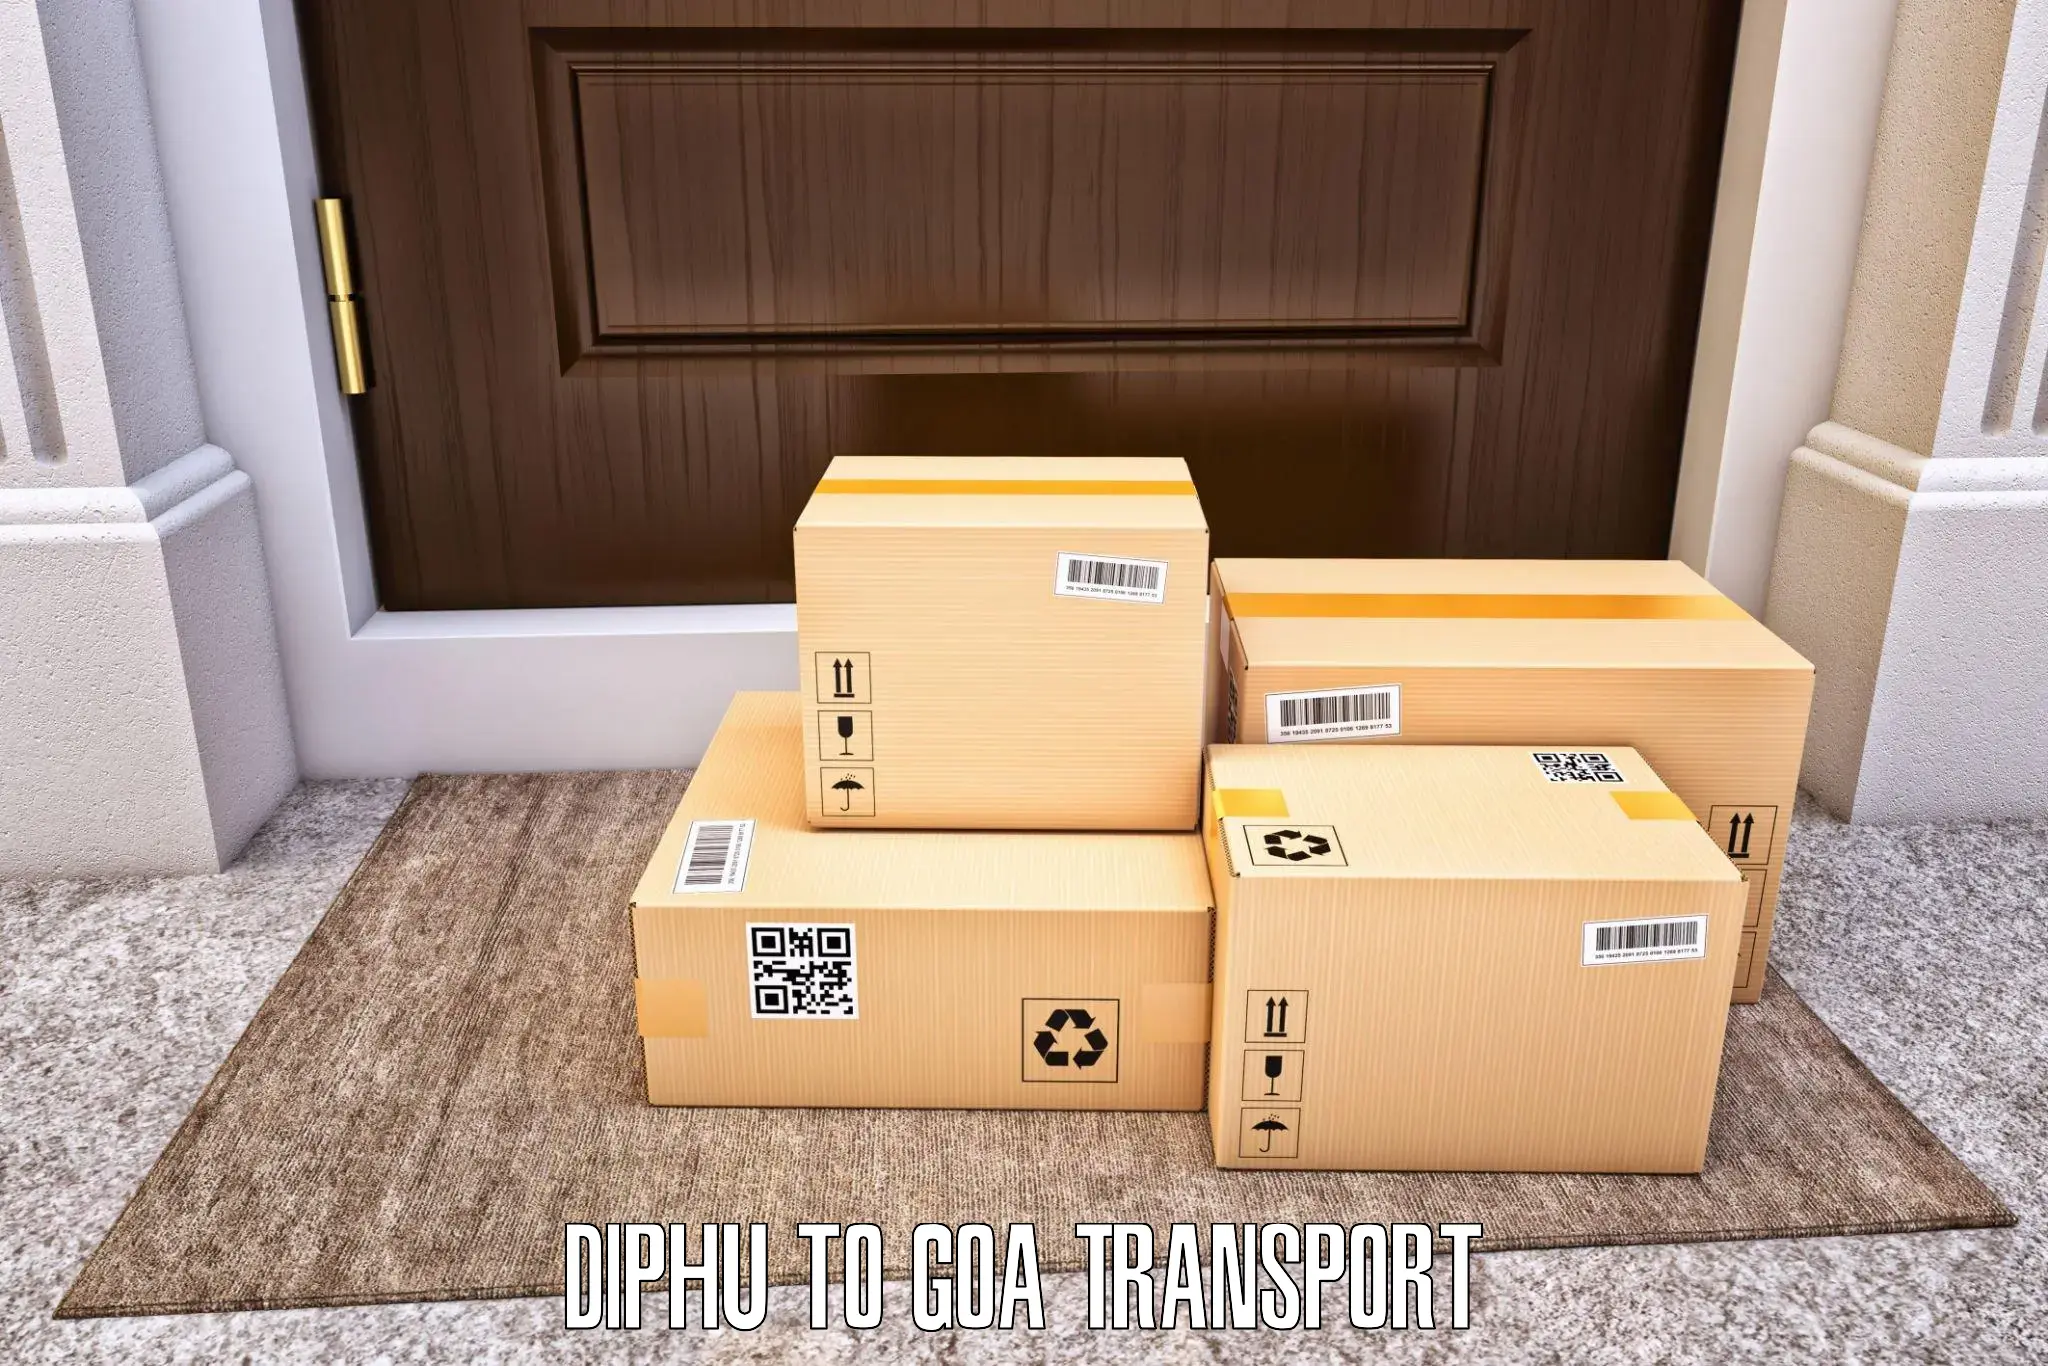 Part load transport service in India Diphu to IIT Goa